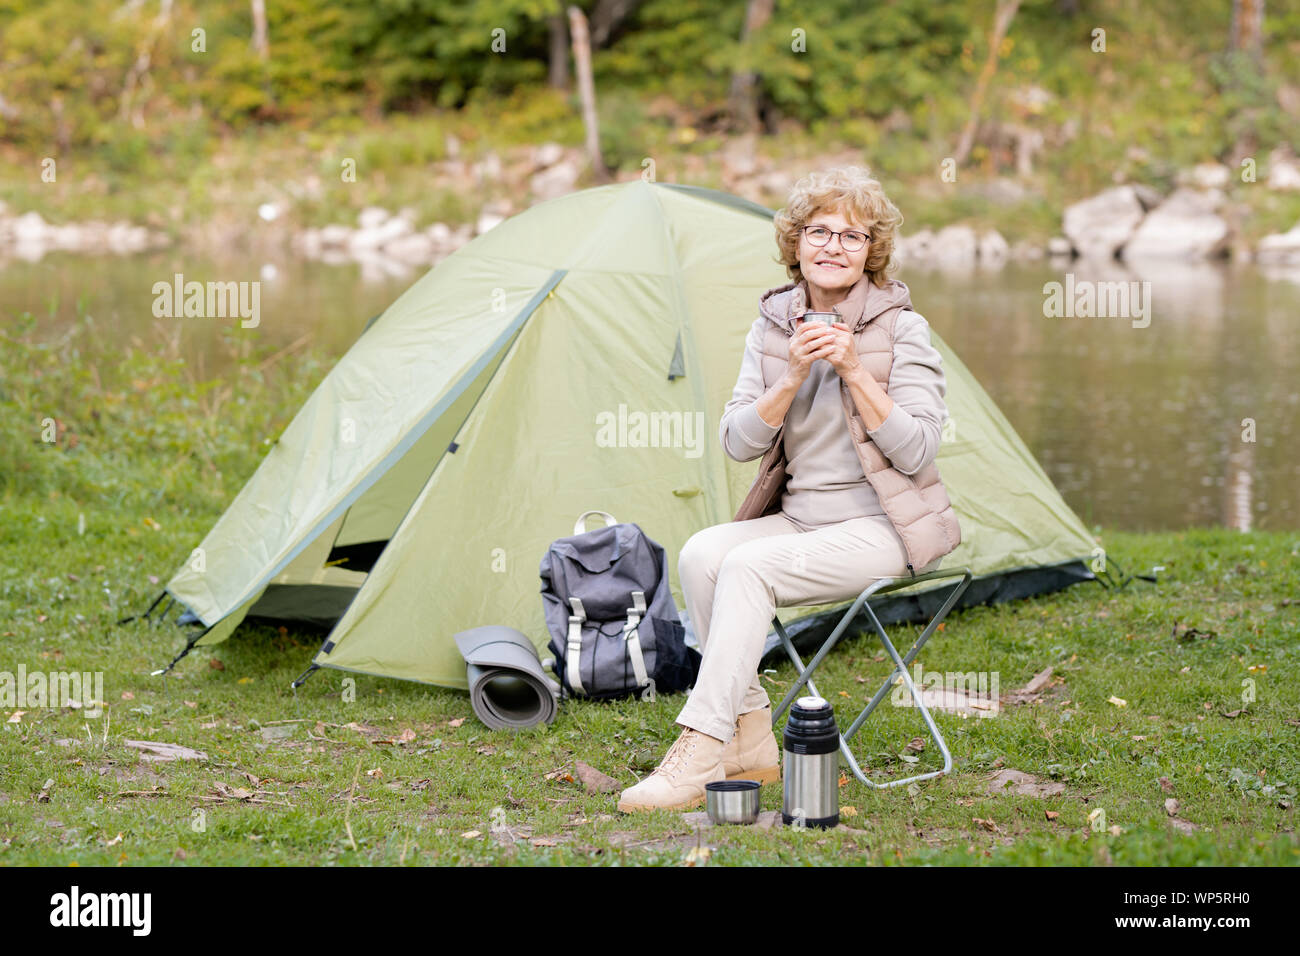 Mature smiling woman holding hot drink while sitting on small tourist chair Stock Photo